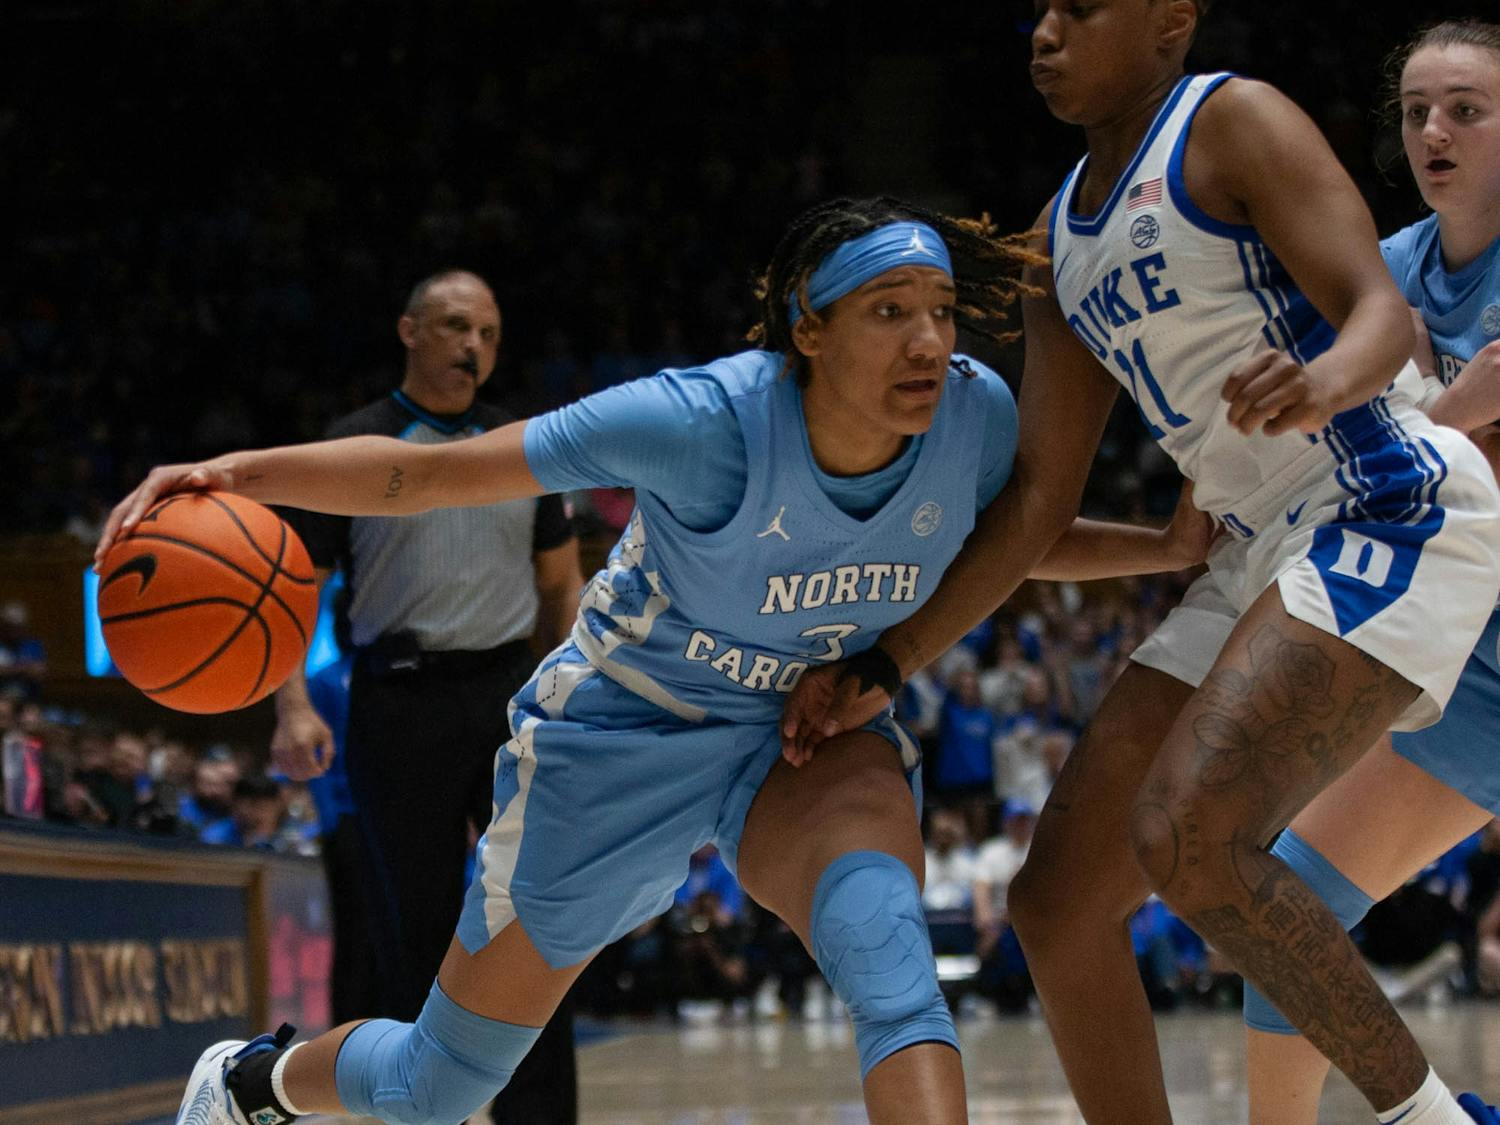 UNC junior guard Kennedy Todd-Williams (3) dribbles the ball during the women’s basketball game against Duke on Sunday, Feb. 26, 2023, at Cameron Indoor Stadium. UNC defeated Duke 45-41.